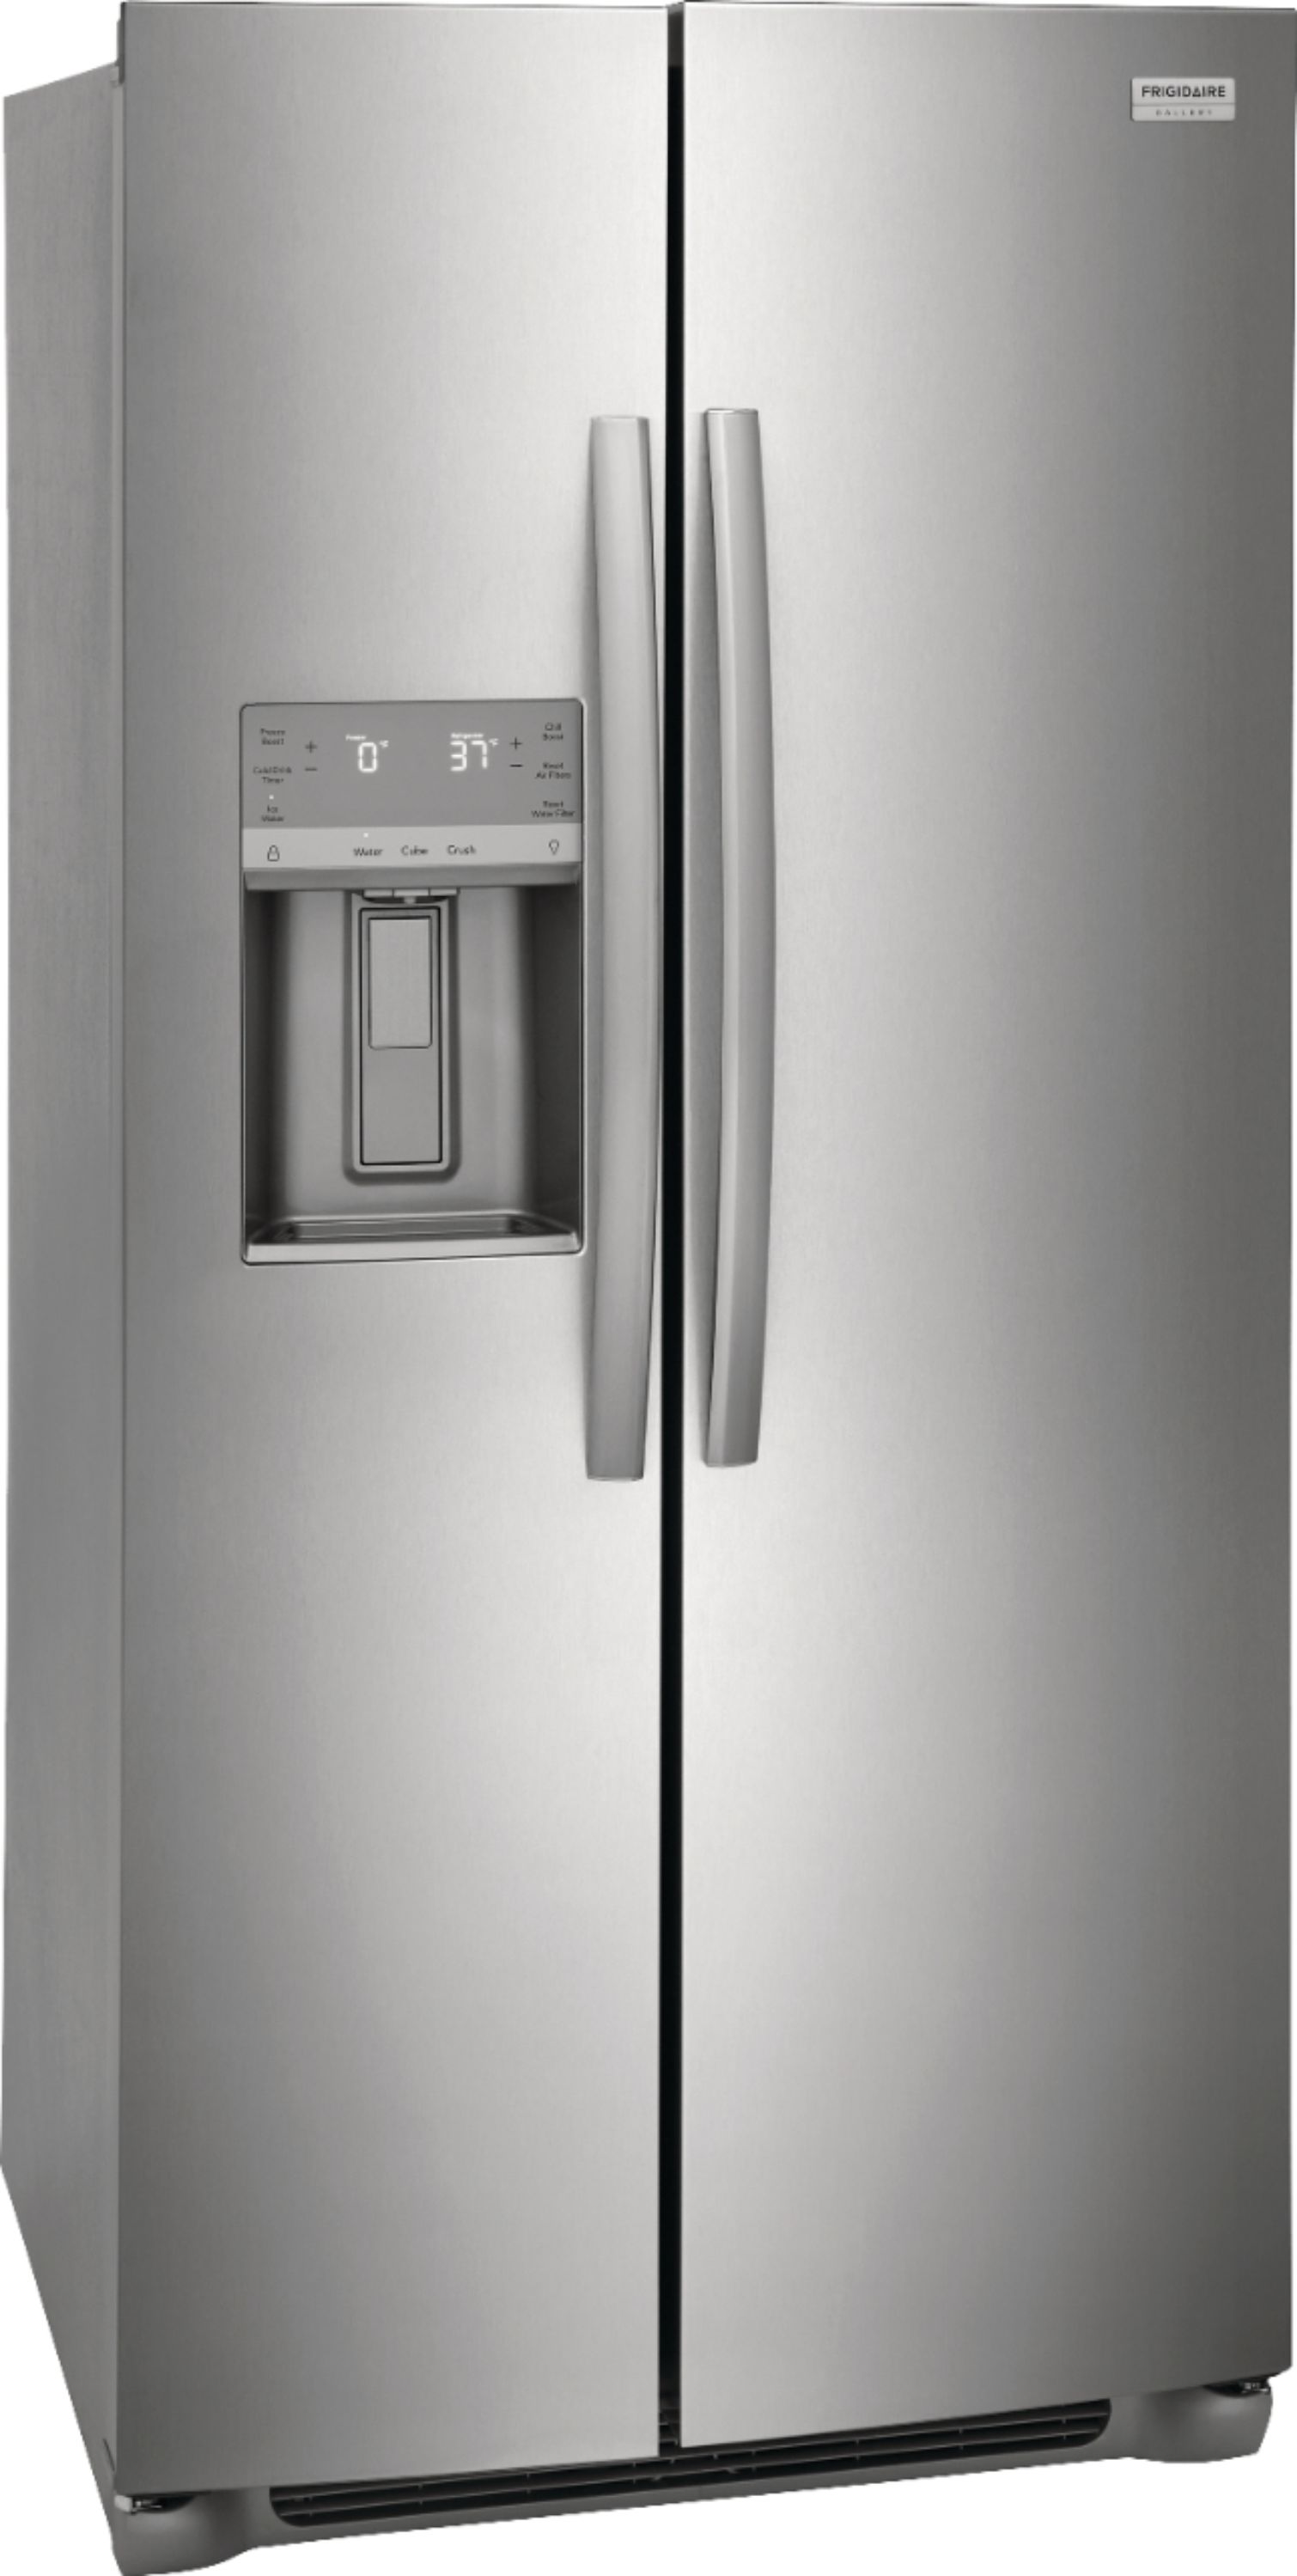 Angle View: Frigidaire - Gallery 22.3 Cu. Ft. Side-by-Side Counter-Depth Refrigerator - Stainless steel